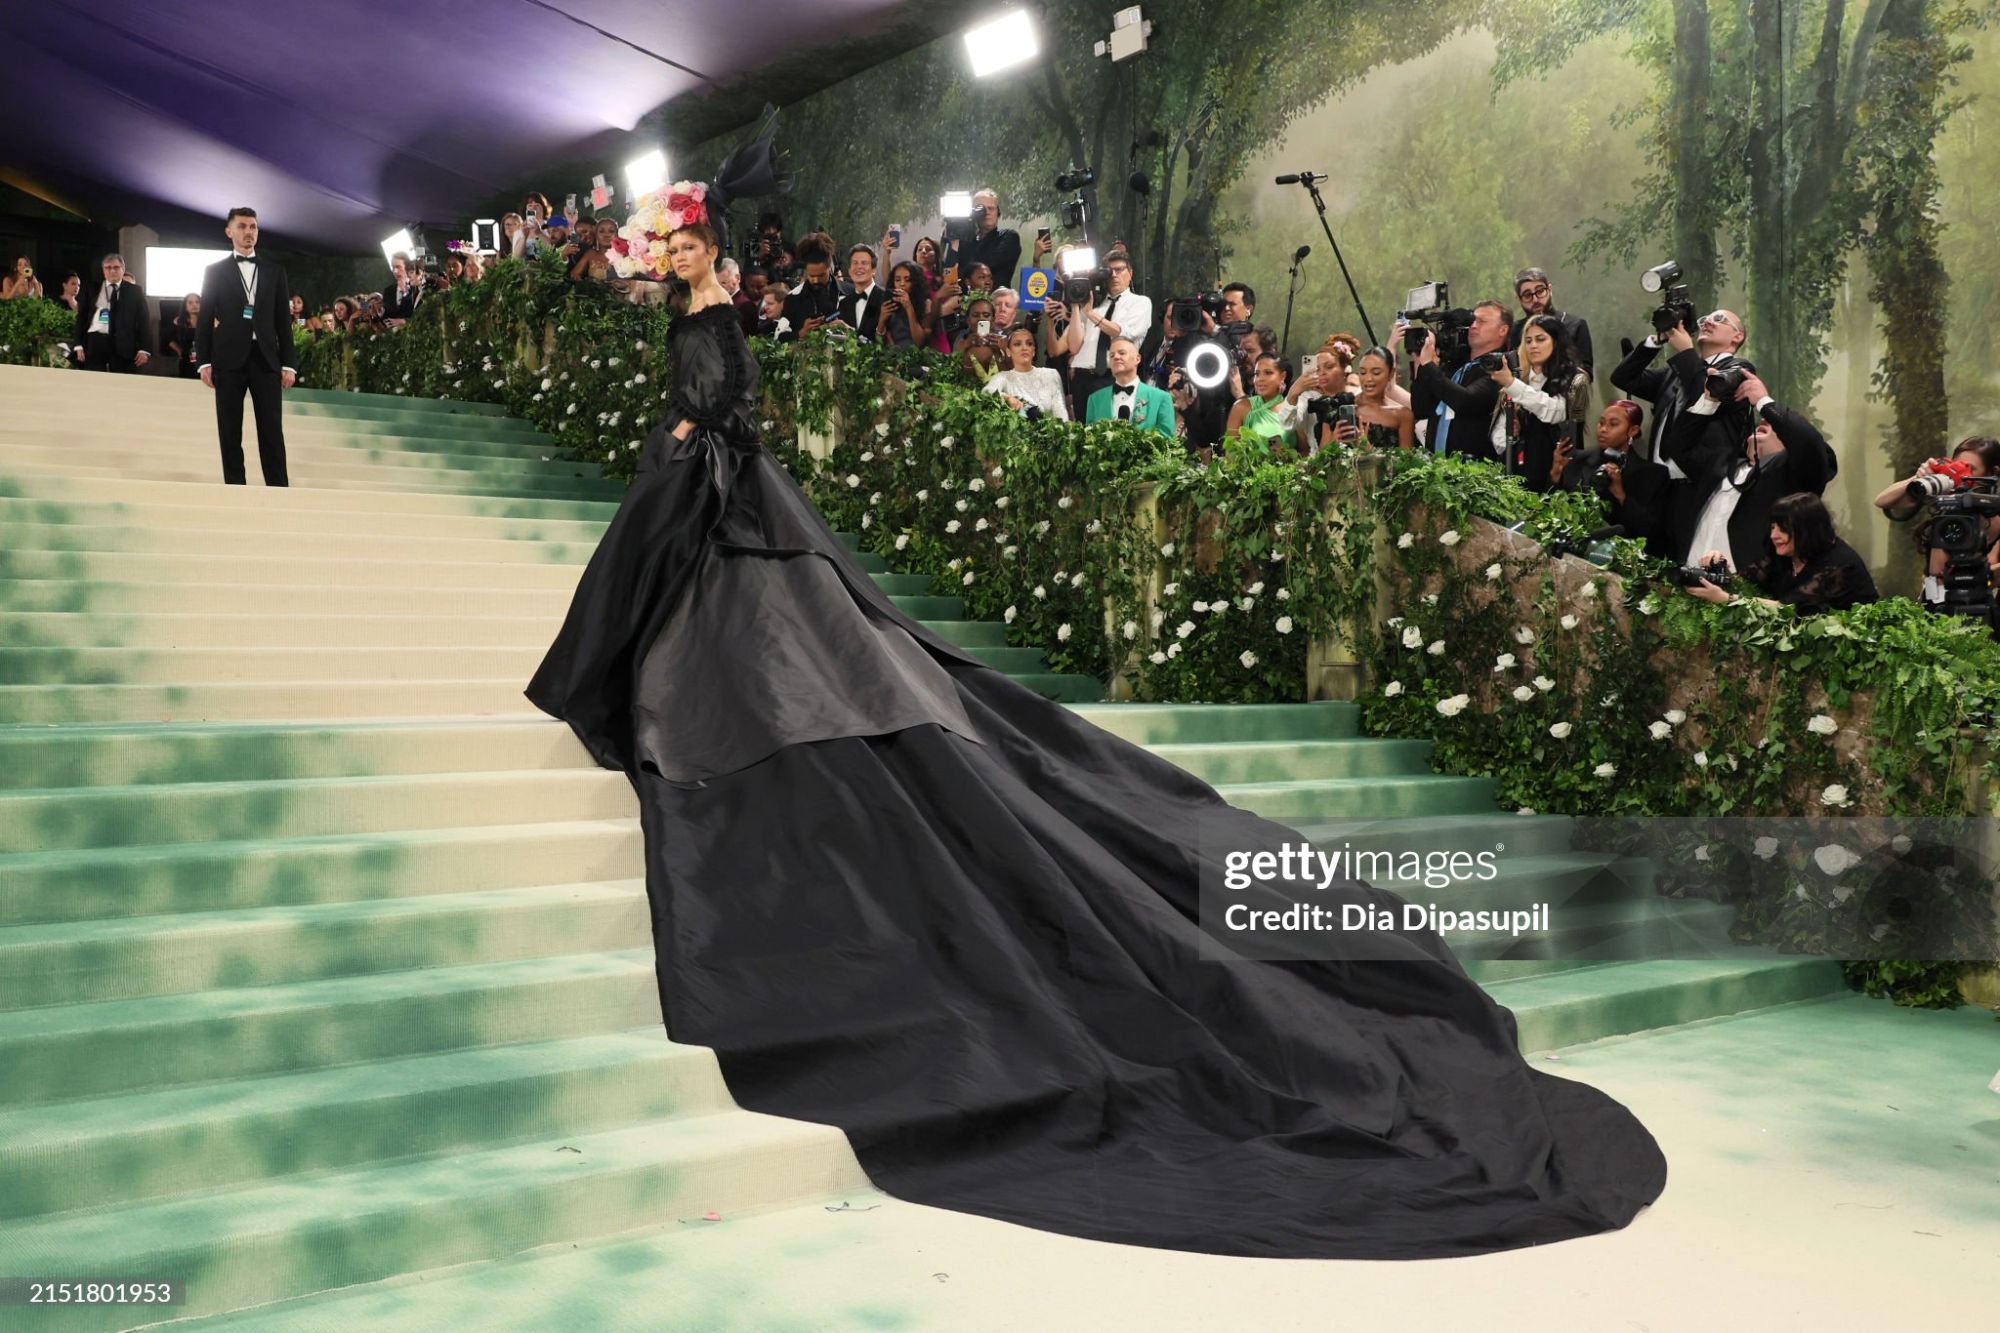 gettyimages-2151801953-2048x2048.jpg